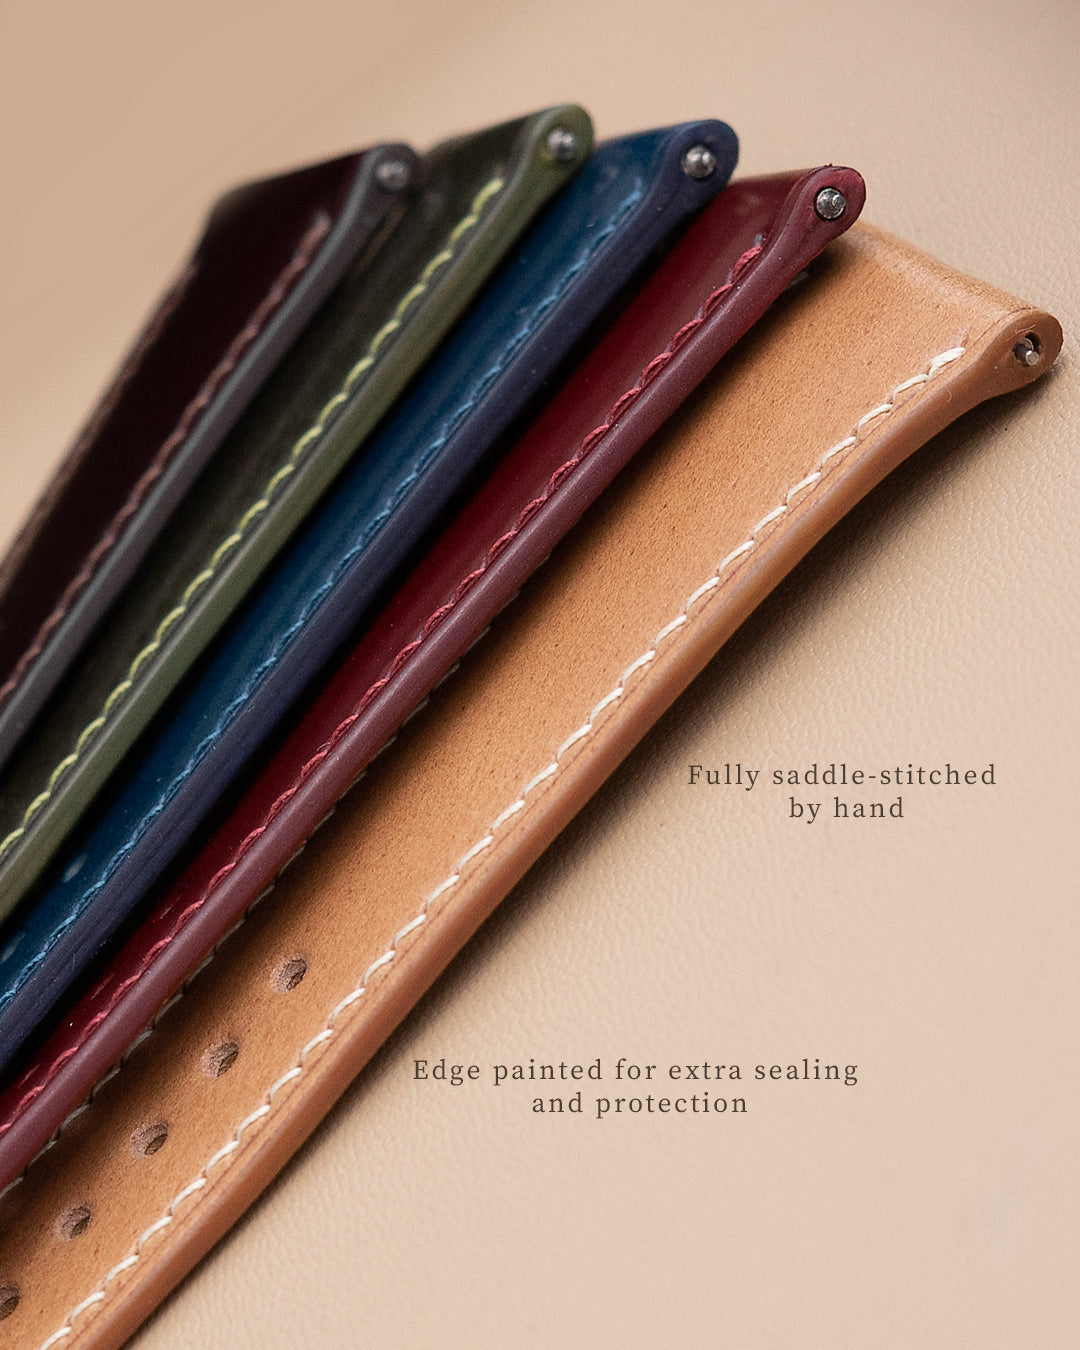 SHELL CORDOVAN – a leatherstore